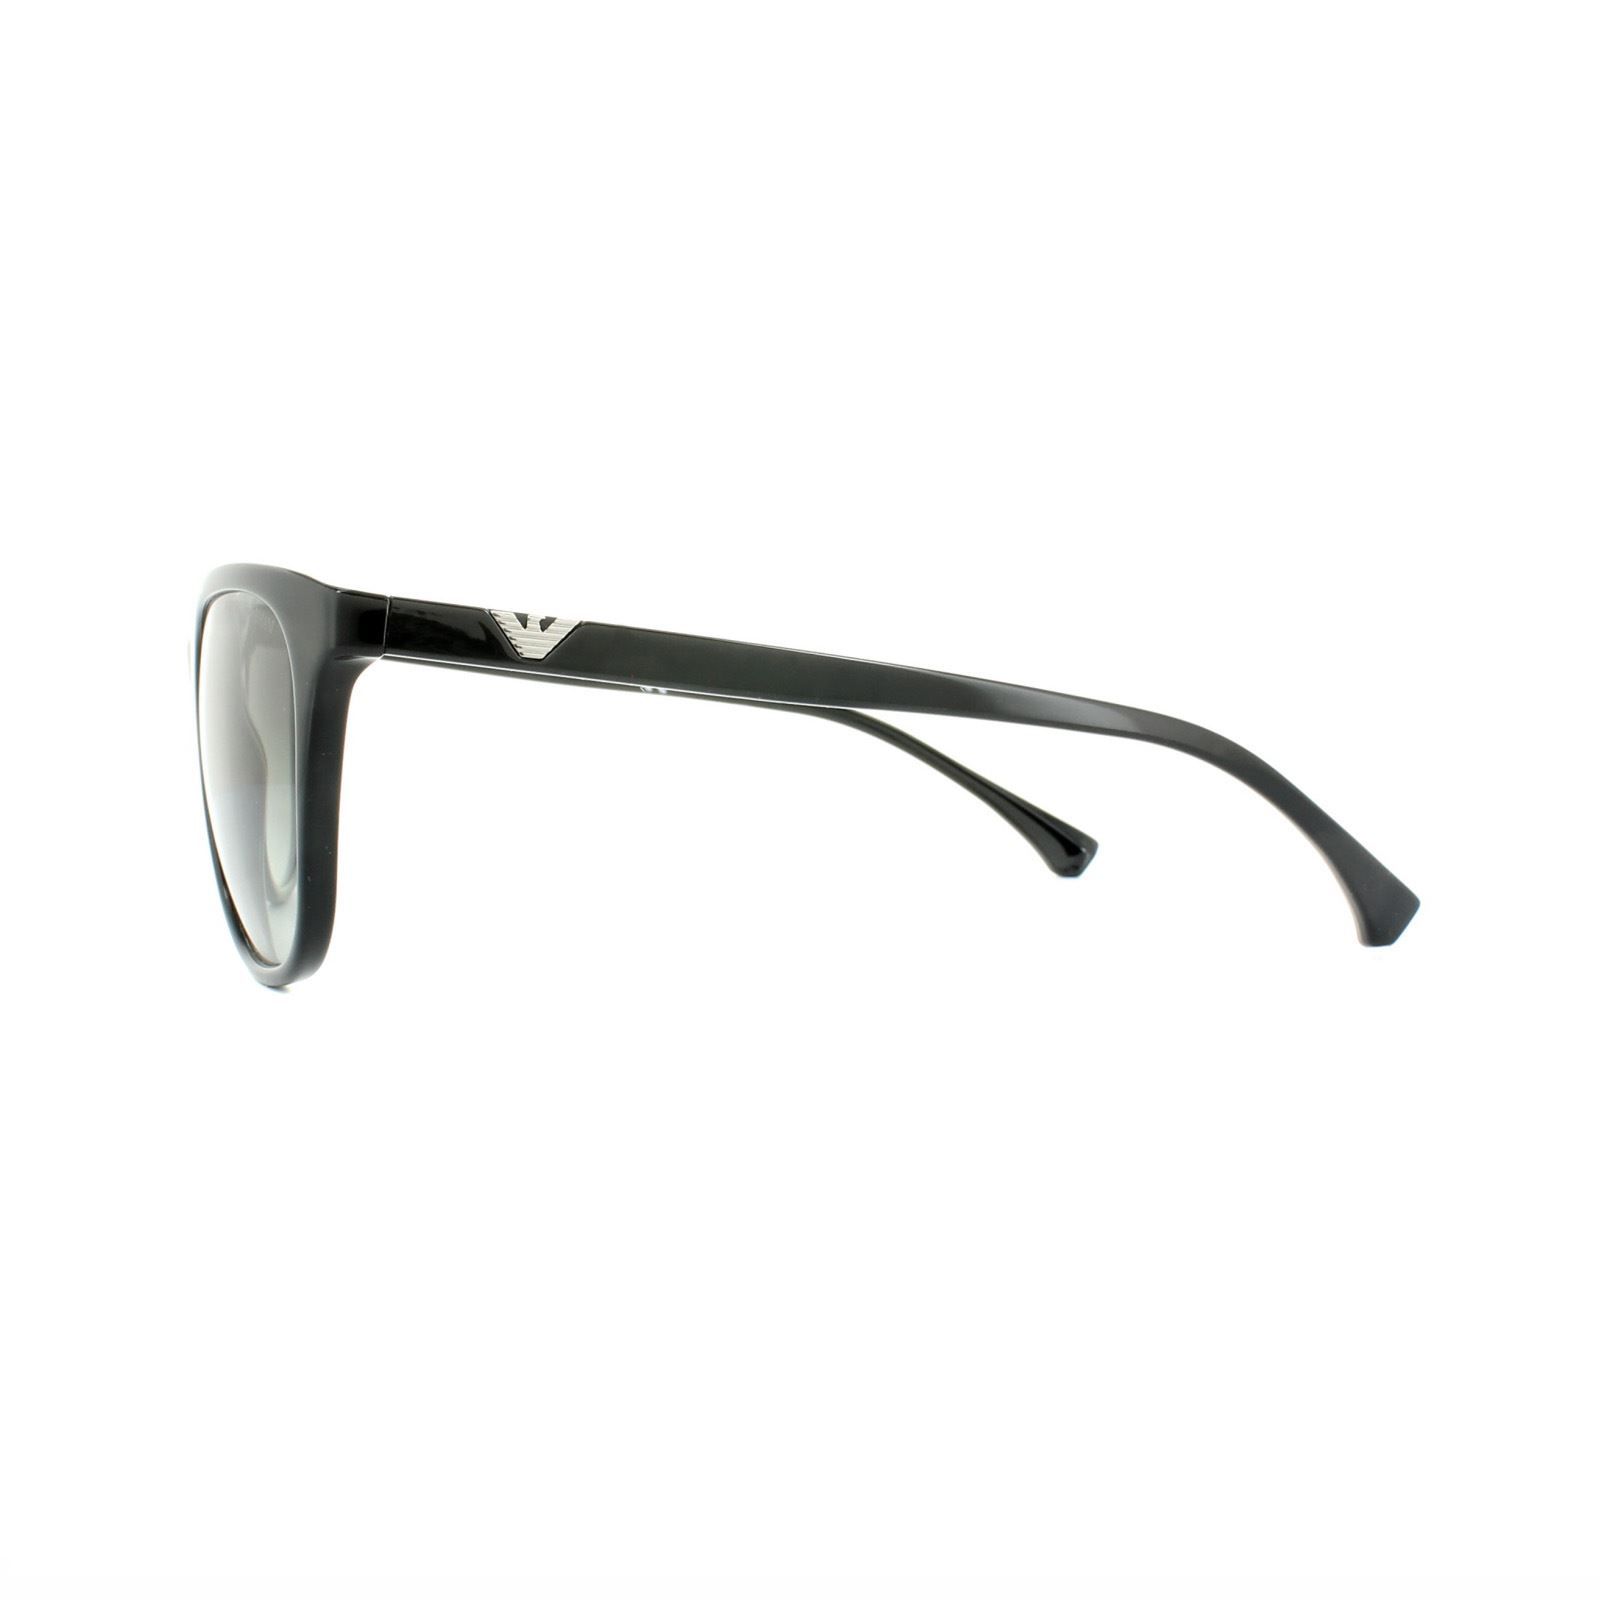 Emporio Armani Sunglasses 4086 5017/11 Black Grey Gradient are a lightweight square shaped acetate frame with minimalist styling for a sleek smooth look that will look great for all occasions. A simple Armani eagle logo on the temples adds authenticity.